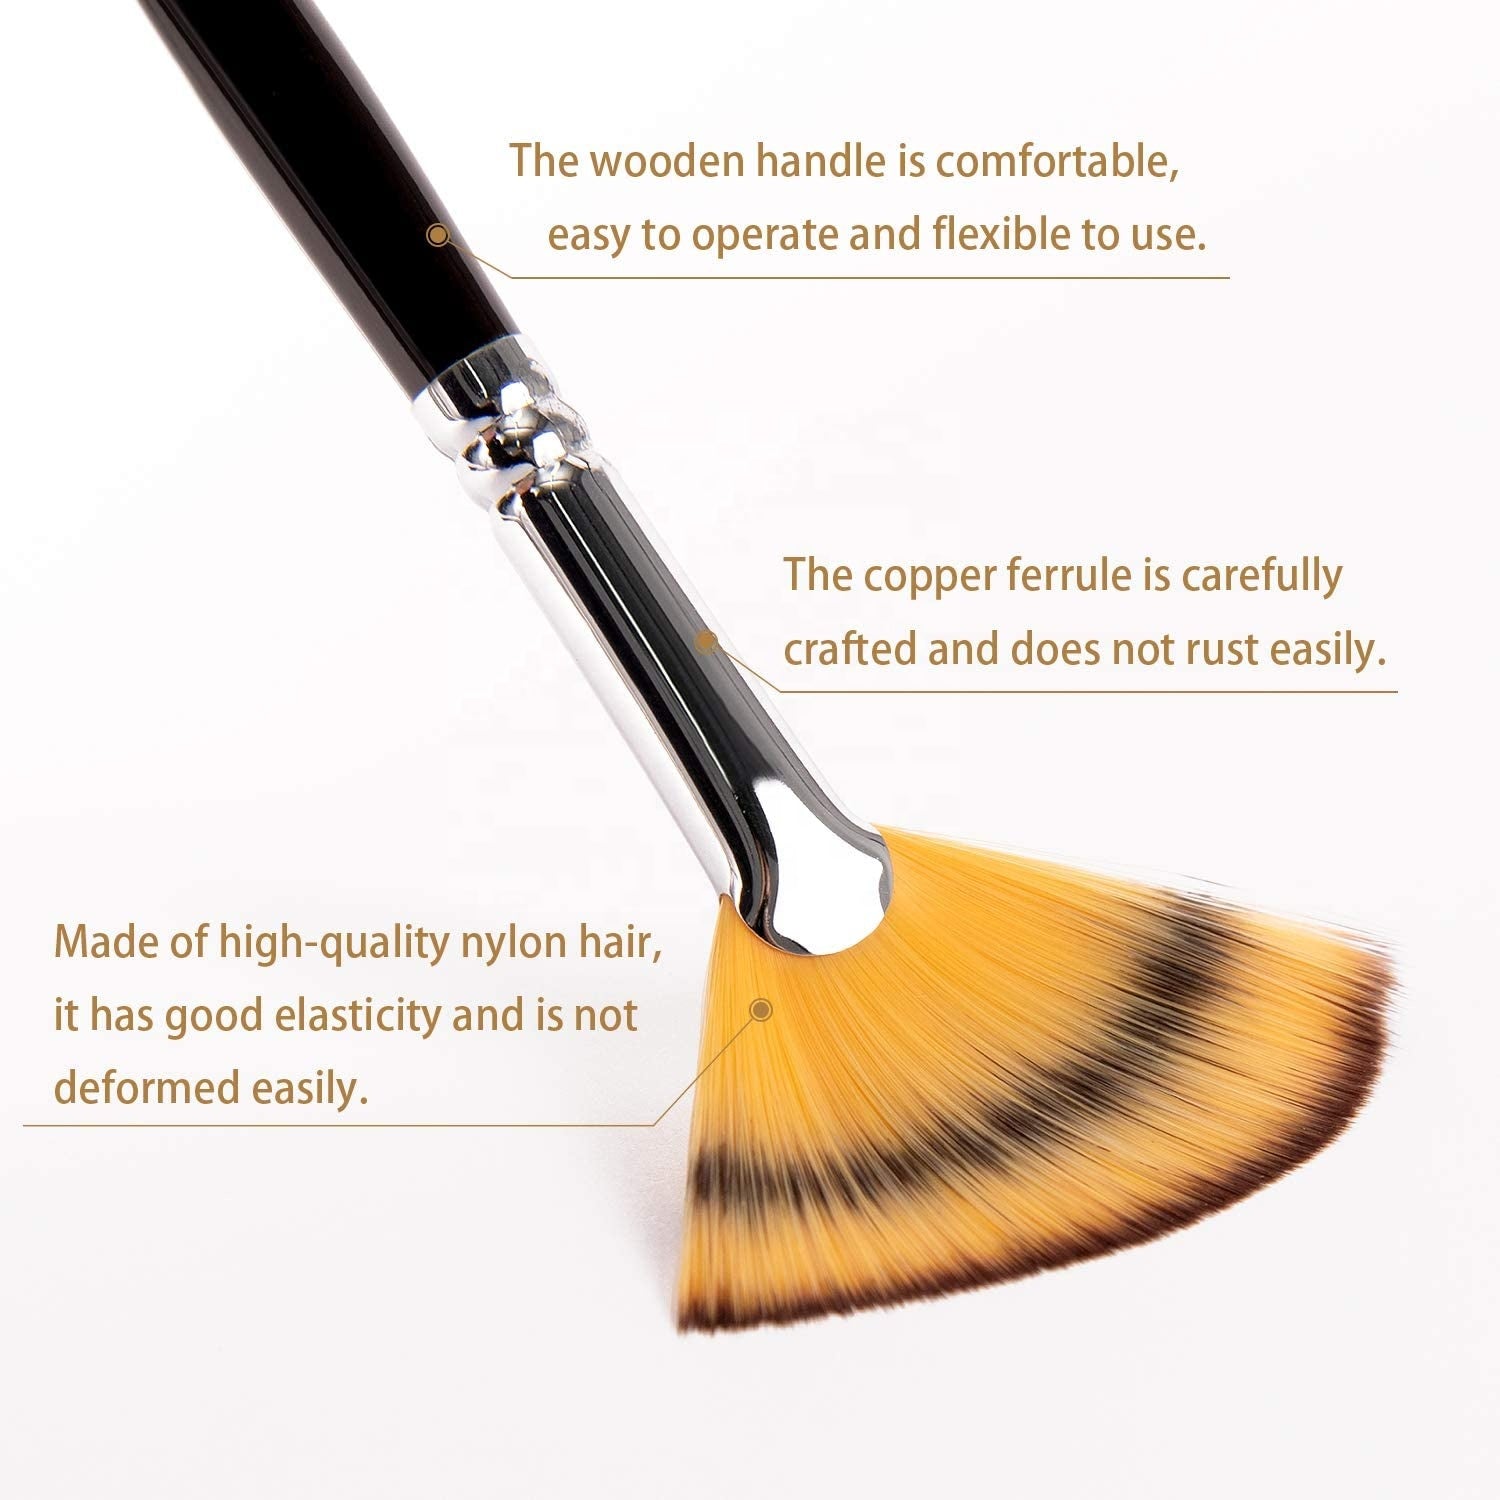 Artist Quality Fan Brushes Set of 6 – The Artist Life